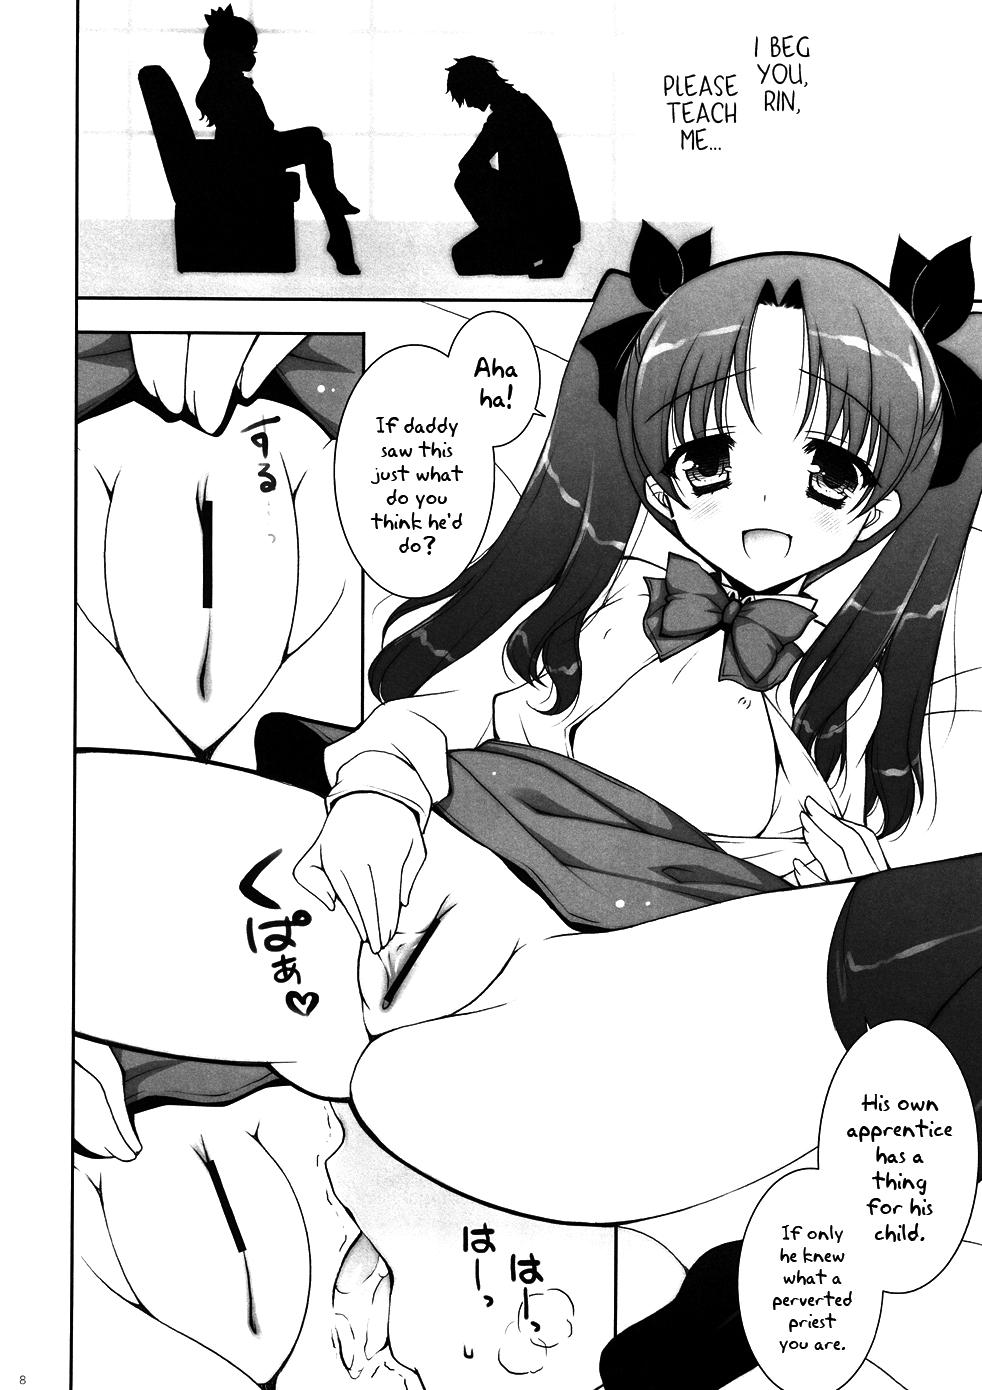 Real The Aggressive Lolis I Come up with Are the Greatest!! - Fate zero Watersports - Page 7